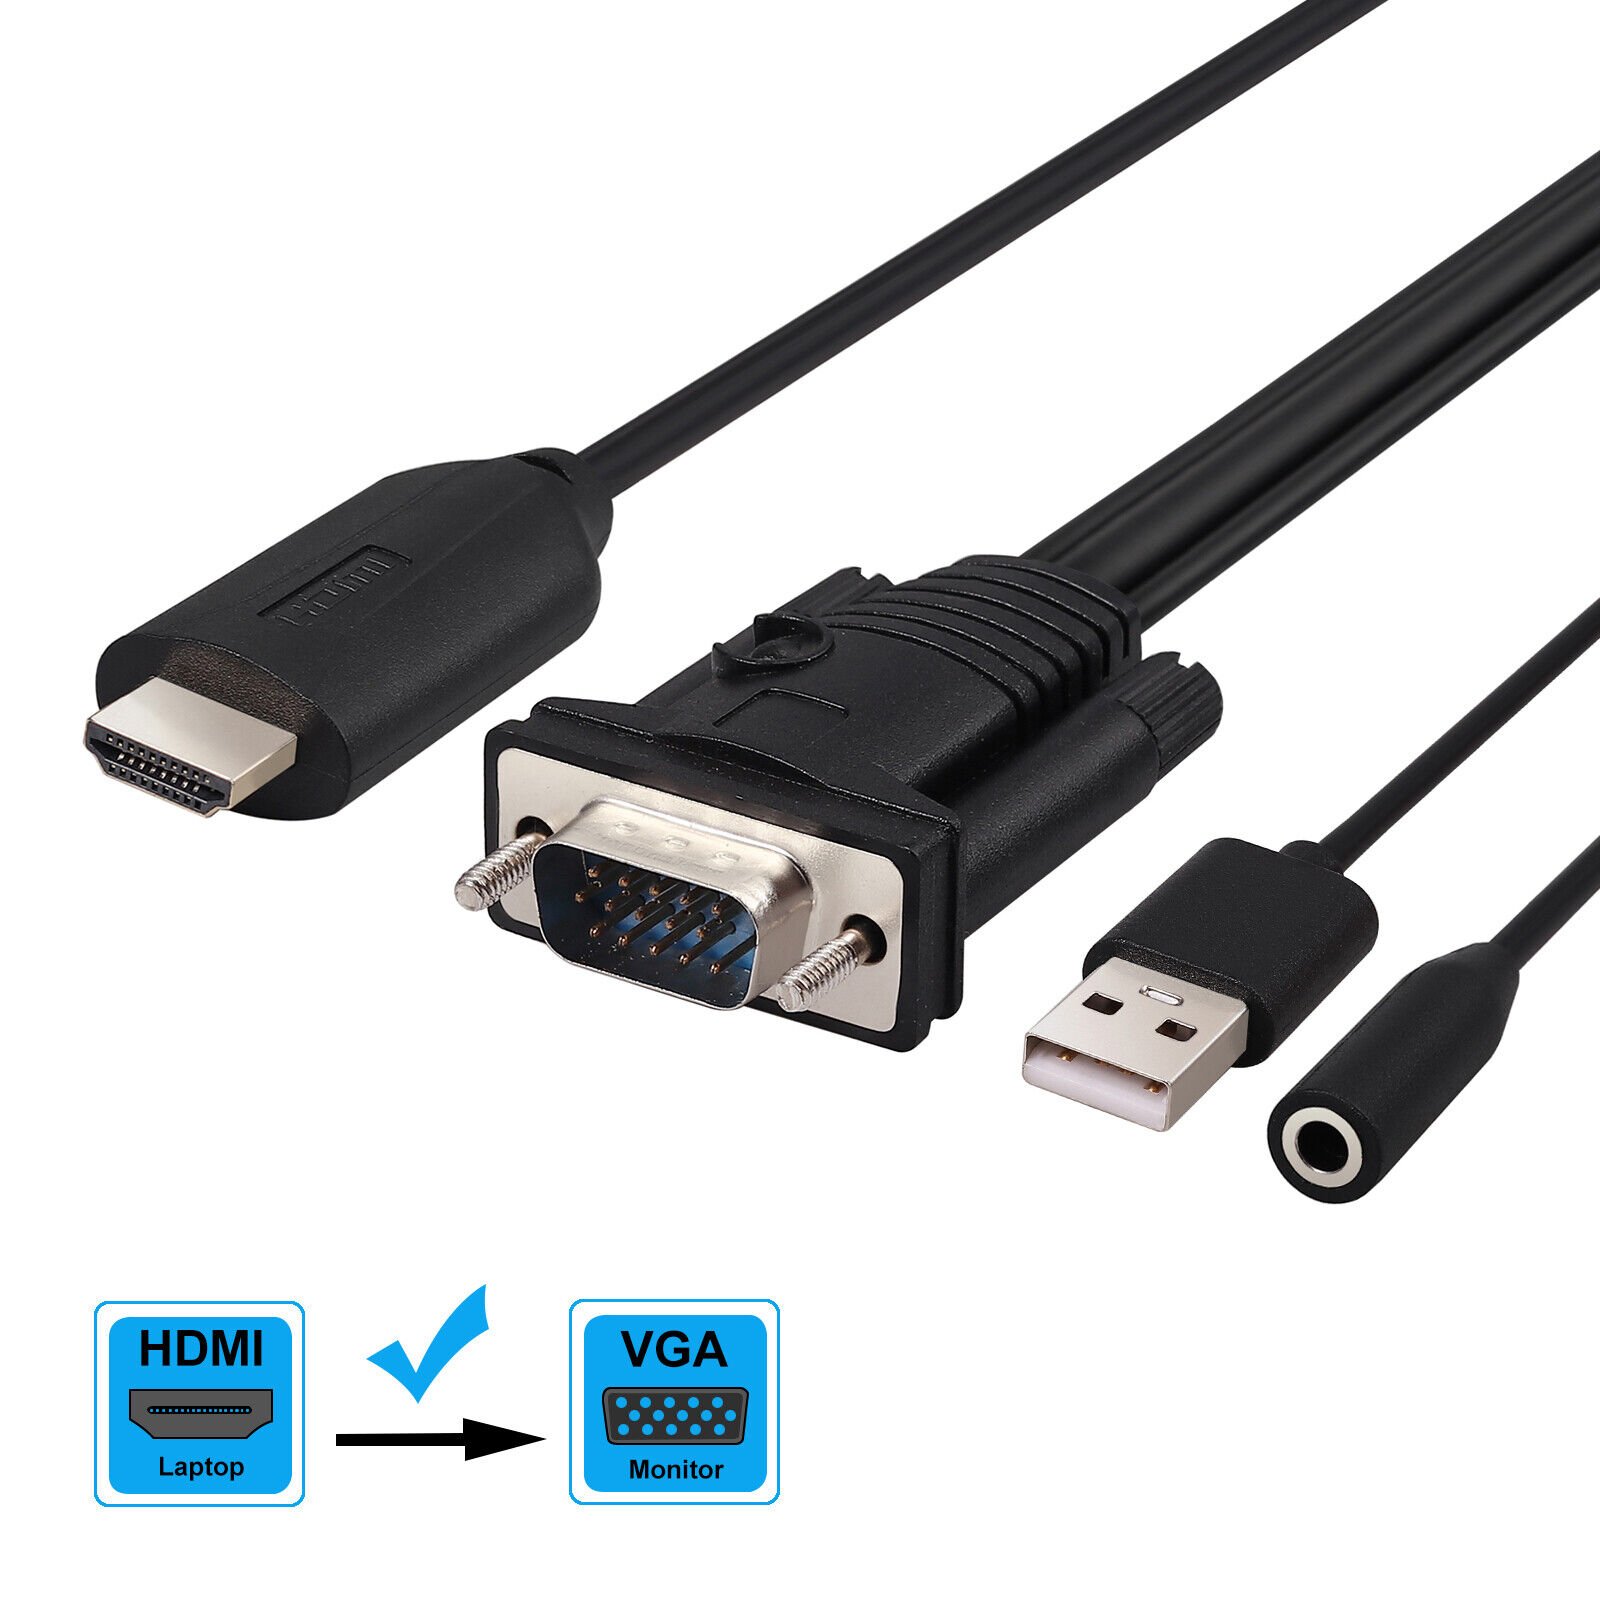 HDMI to VGA Converter 1080P Adapter w/ Female 3.5mm Audio Cable Cord For Xbox TV